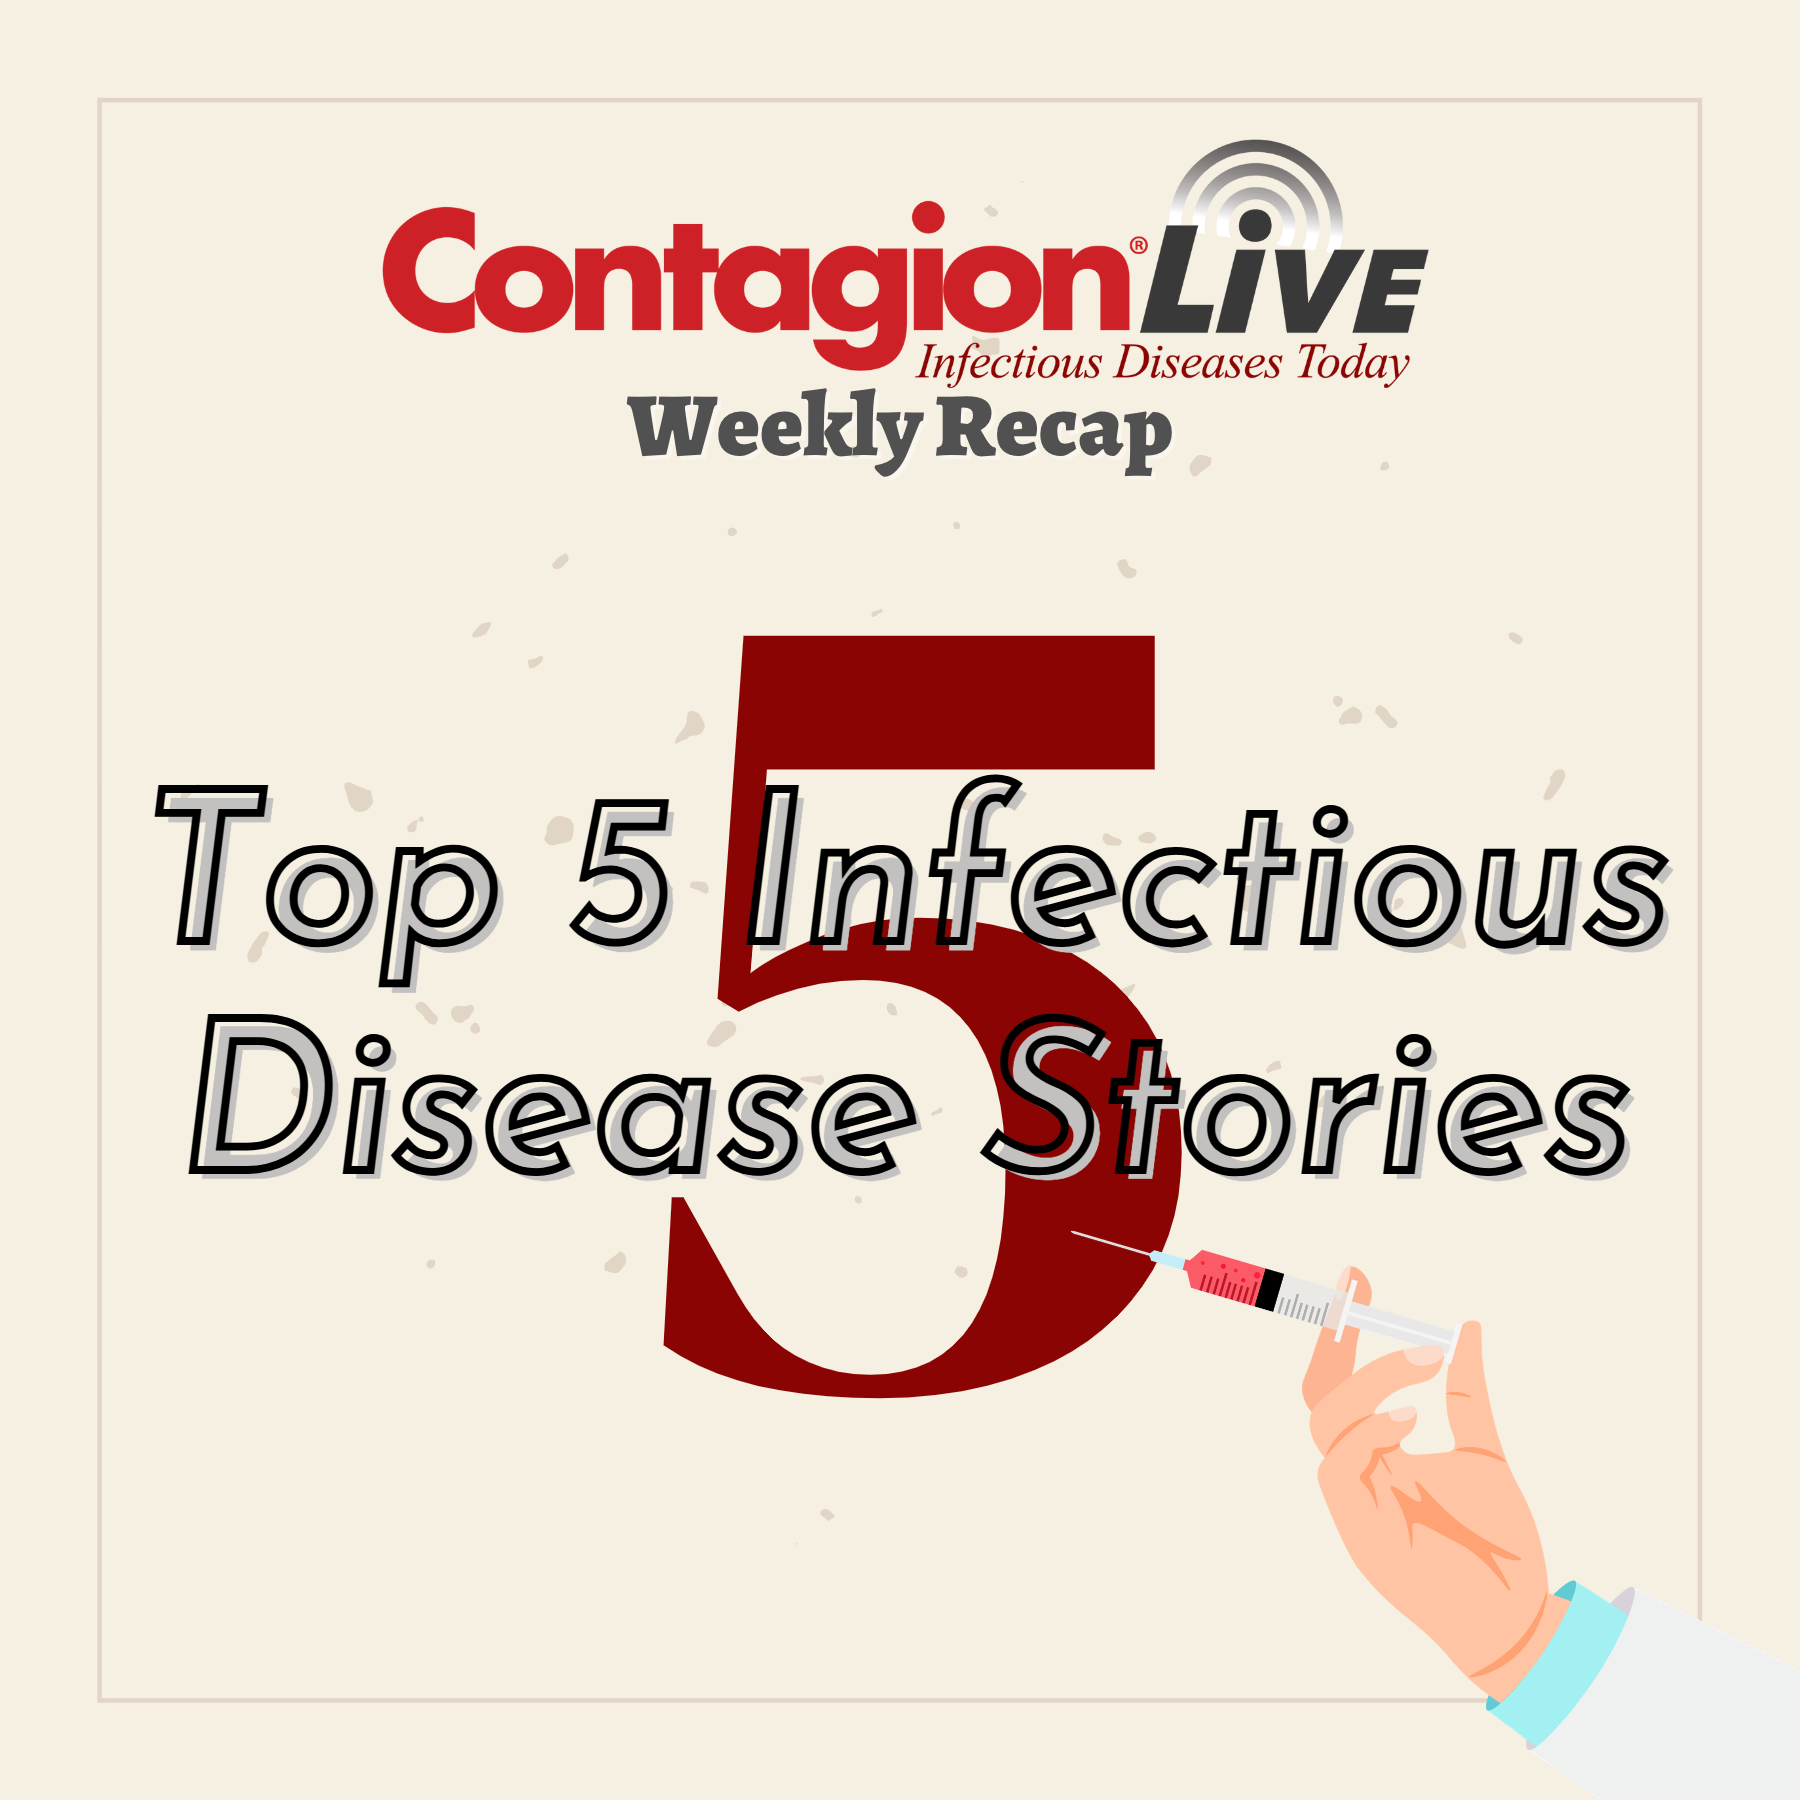 This Week in Infectious Disease, Recapped